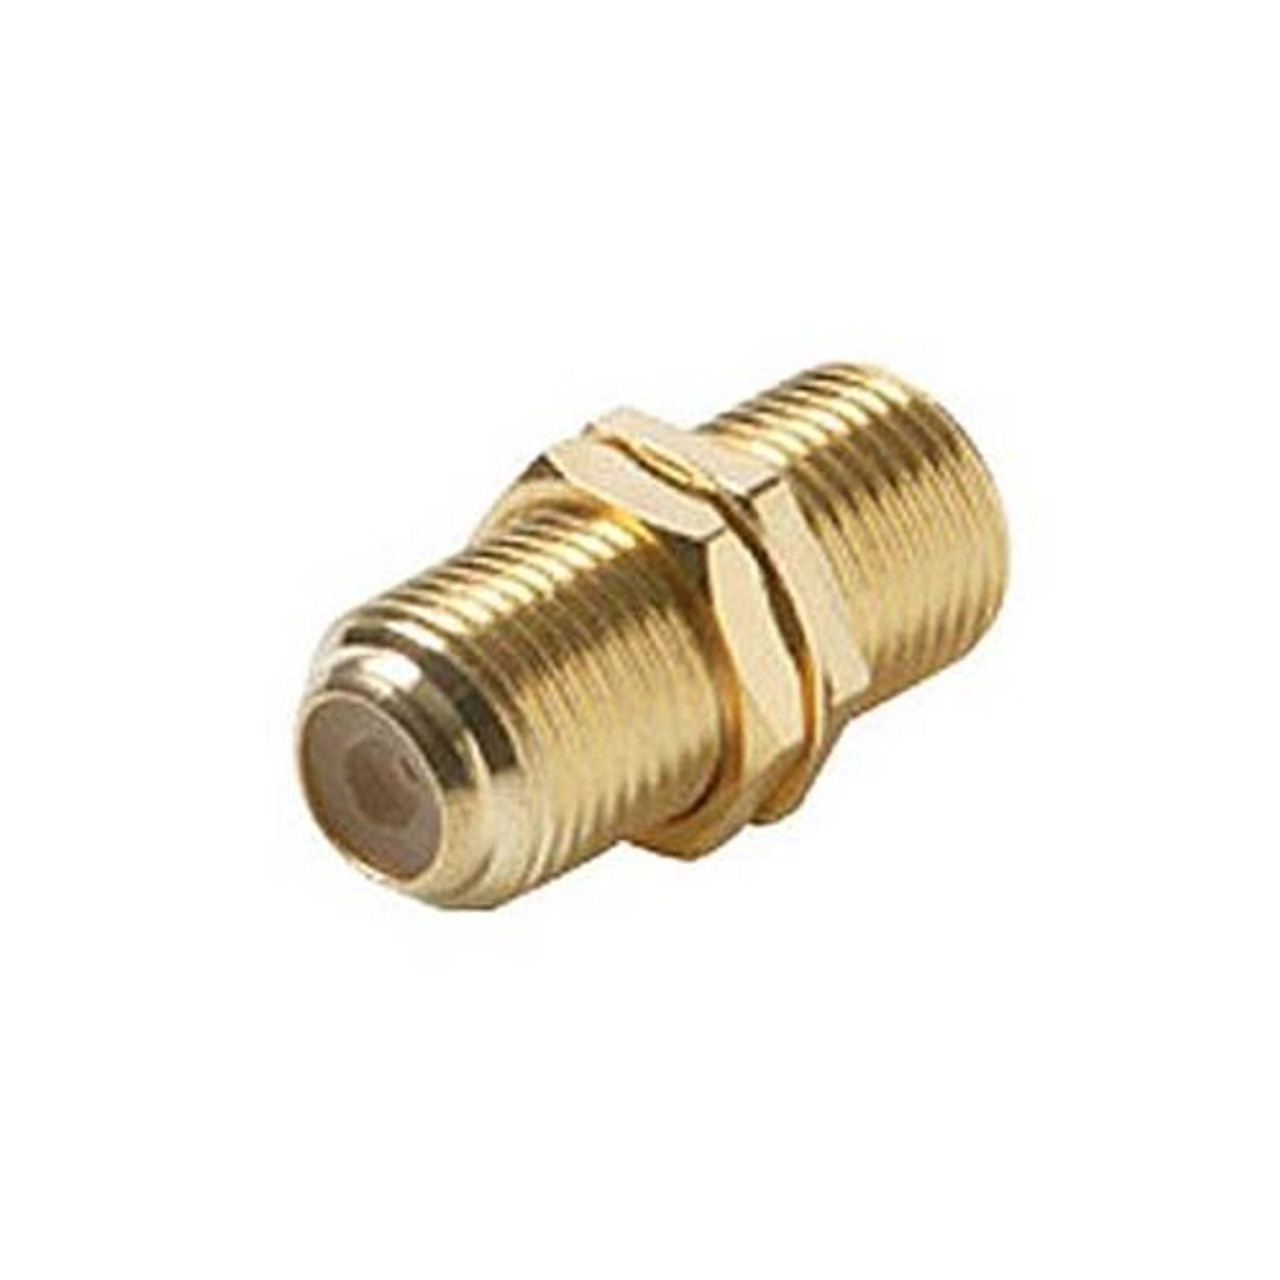 Steren 251-503-10 Single F Type Barrel Coupler Gold Plate F-81 F to F Female Connector Wall Plate Use Barrel 10 Pack Jack Splice Connector Adapter Jointer Coupling Audio Video Coaxial Cable Plug Extension, Part # 251503-10